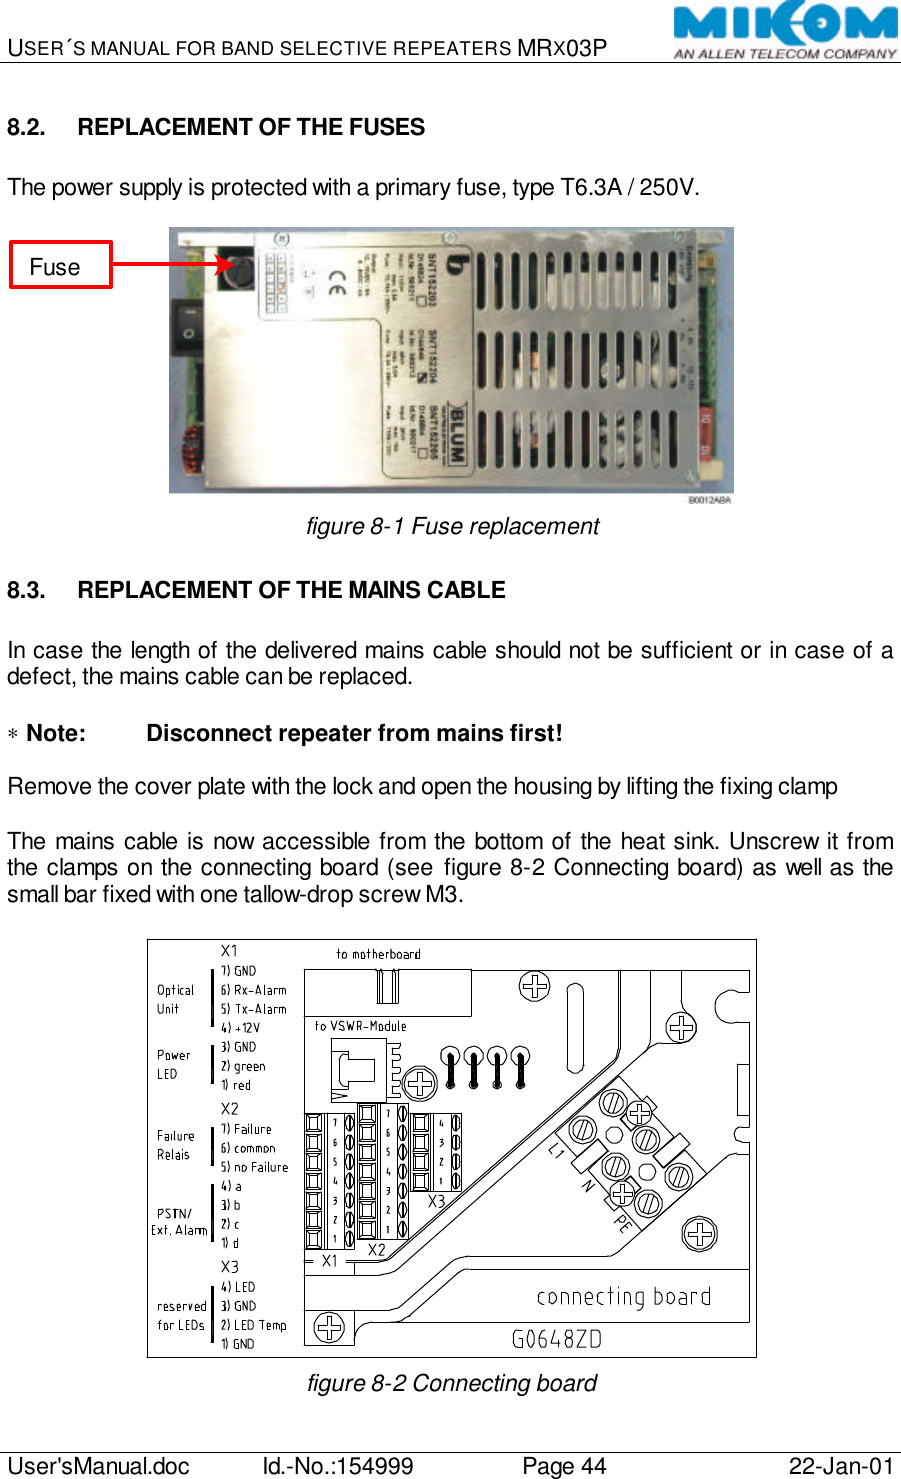 USER´S MANUAL FOR BAND SELECTIVE REPEATERS MRX03P   User&apos;sManual.doc Id.-No.:154999 Page 44 22-Jan-01  8.2. REPLACEMENT OF THE FUSES  The power supply is protected with a primary fuse, type T6.3A / 250V.   figure 8-1 Fuse replacement 8.3. REPLACEMENT OF THE MAINS CABLE  In case the length of the delivered mains cable should not be sufficient or in case of a defect, the mains cable can be replaced.  ∗ Note: Disconnect repeater from mains first!  Remove the cover plate with the lock and open the housing by lifting the fixing clamp   The mains cable is now accessible from the bottom of the heat sink. Unscrew it from the clamps on the connecting board (see figure 8-2 Connecting board) as well as the small bar fixed with one tallow-drop screw M3.   figure 8-2 Connecting board Fuse 